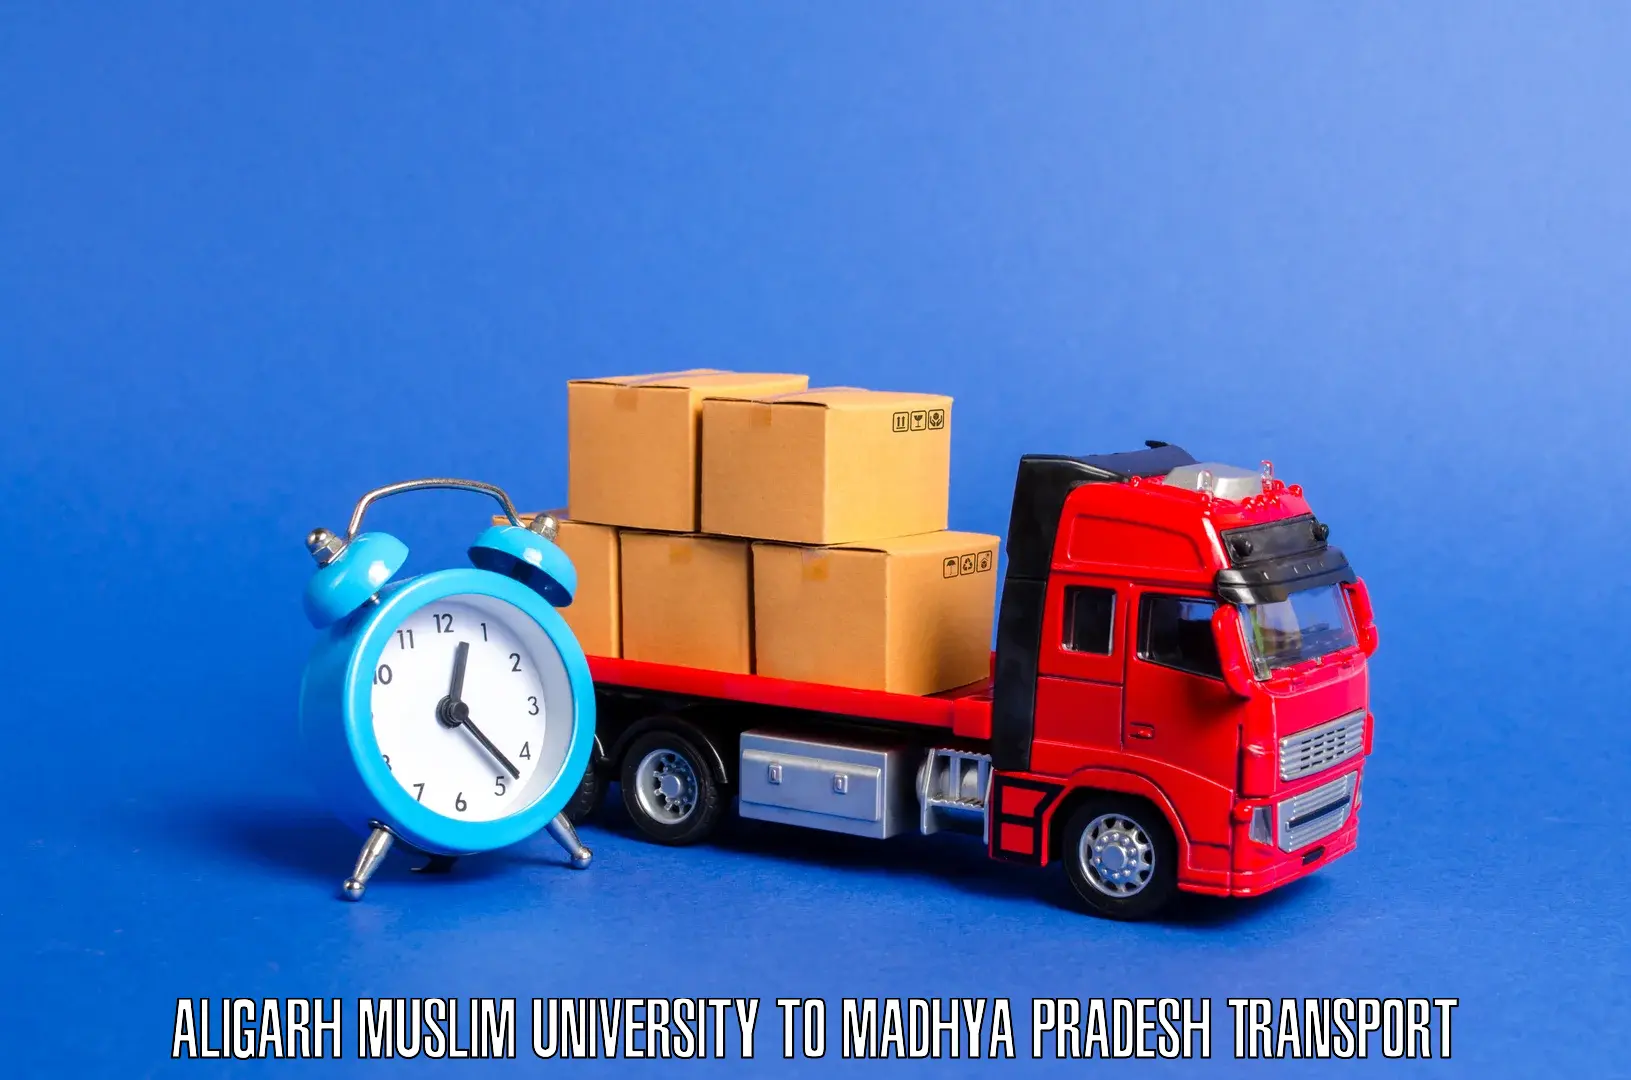 Package delivery services Aligarh Muslim University to Shujalpur